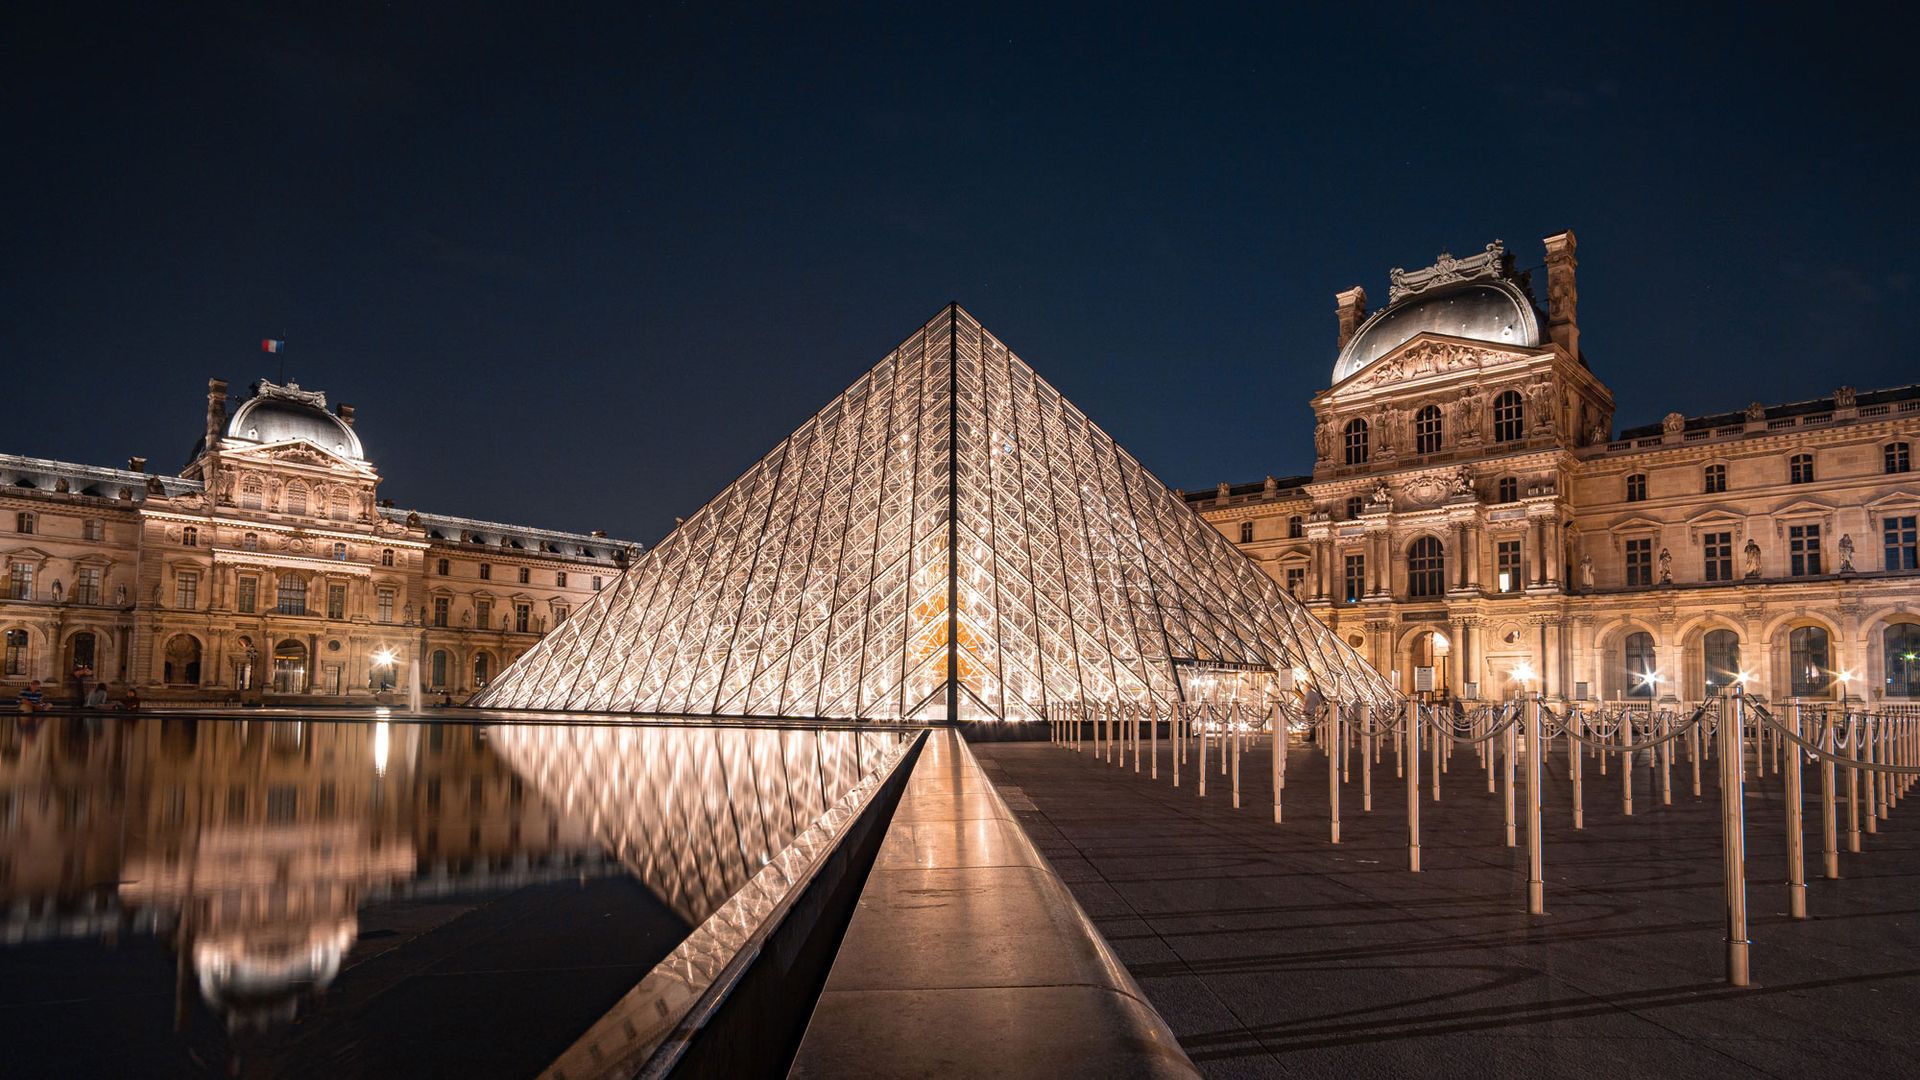 The Musée du Louvre is among more than 20 French museums that have donated emergency materials to museum staff securing collections in Ukraine Photo: Michael Fousert/Unsplash